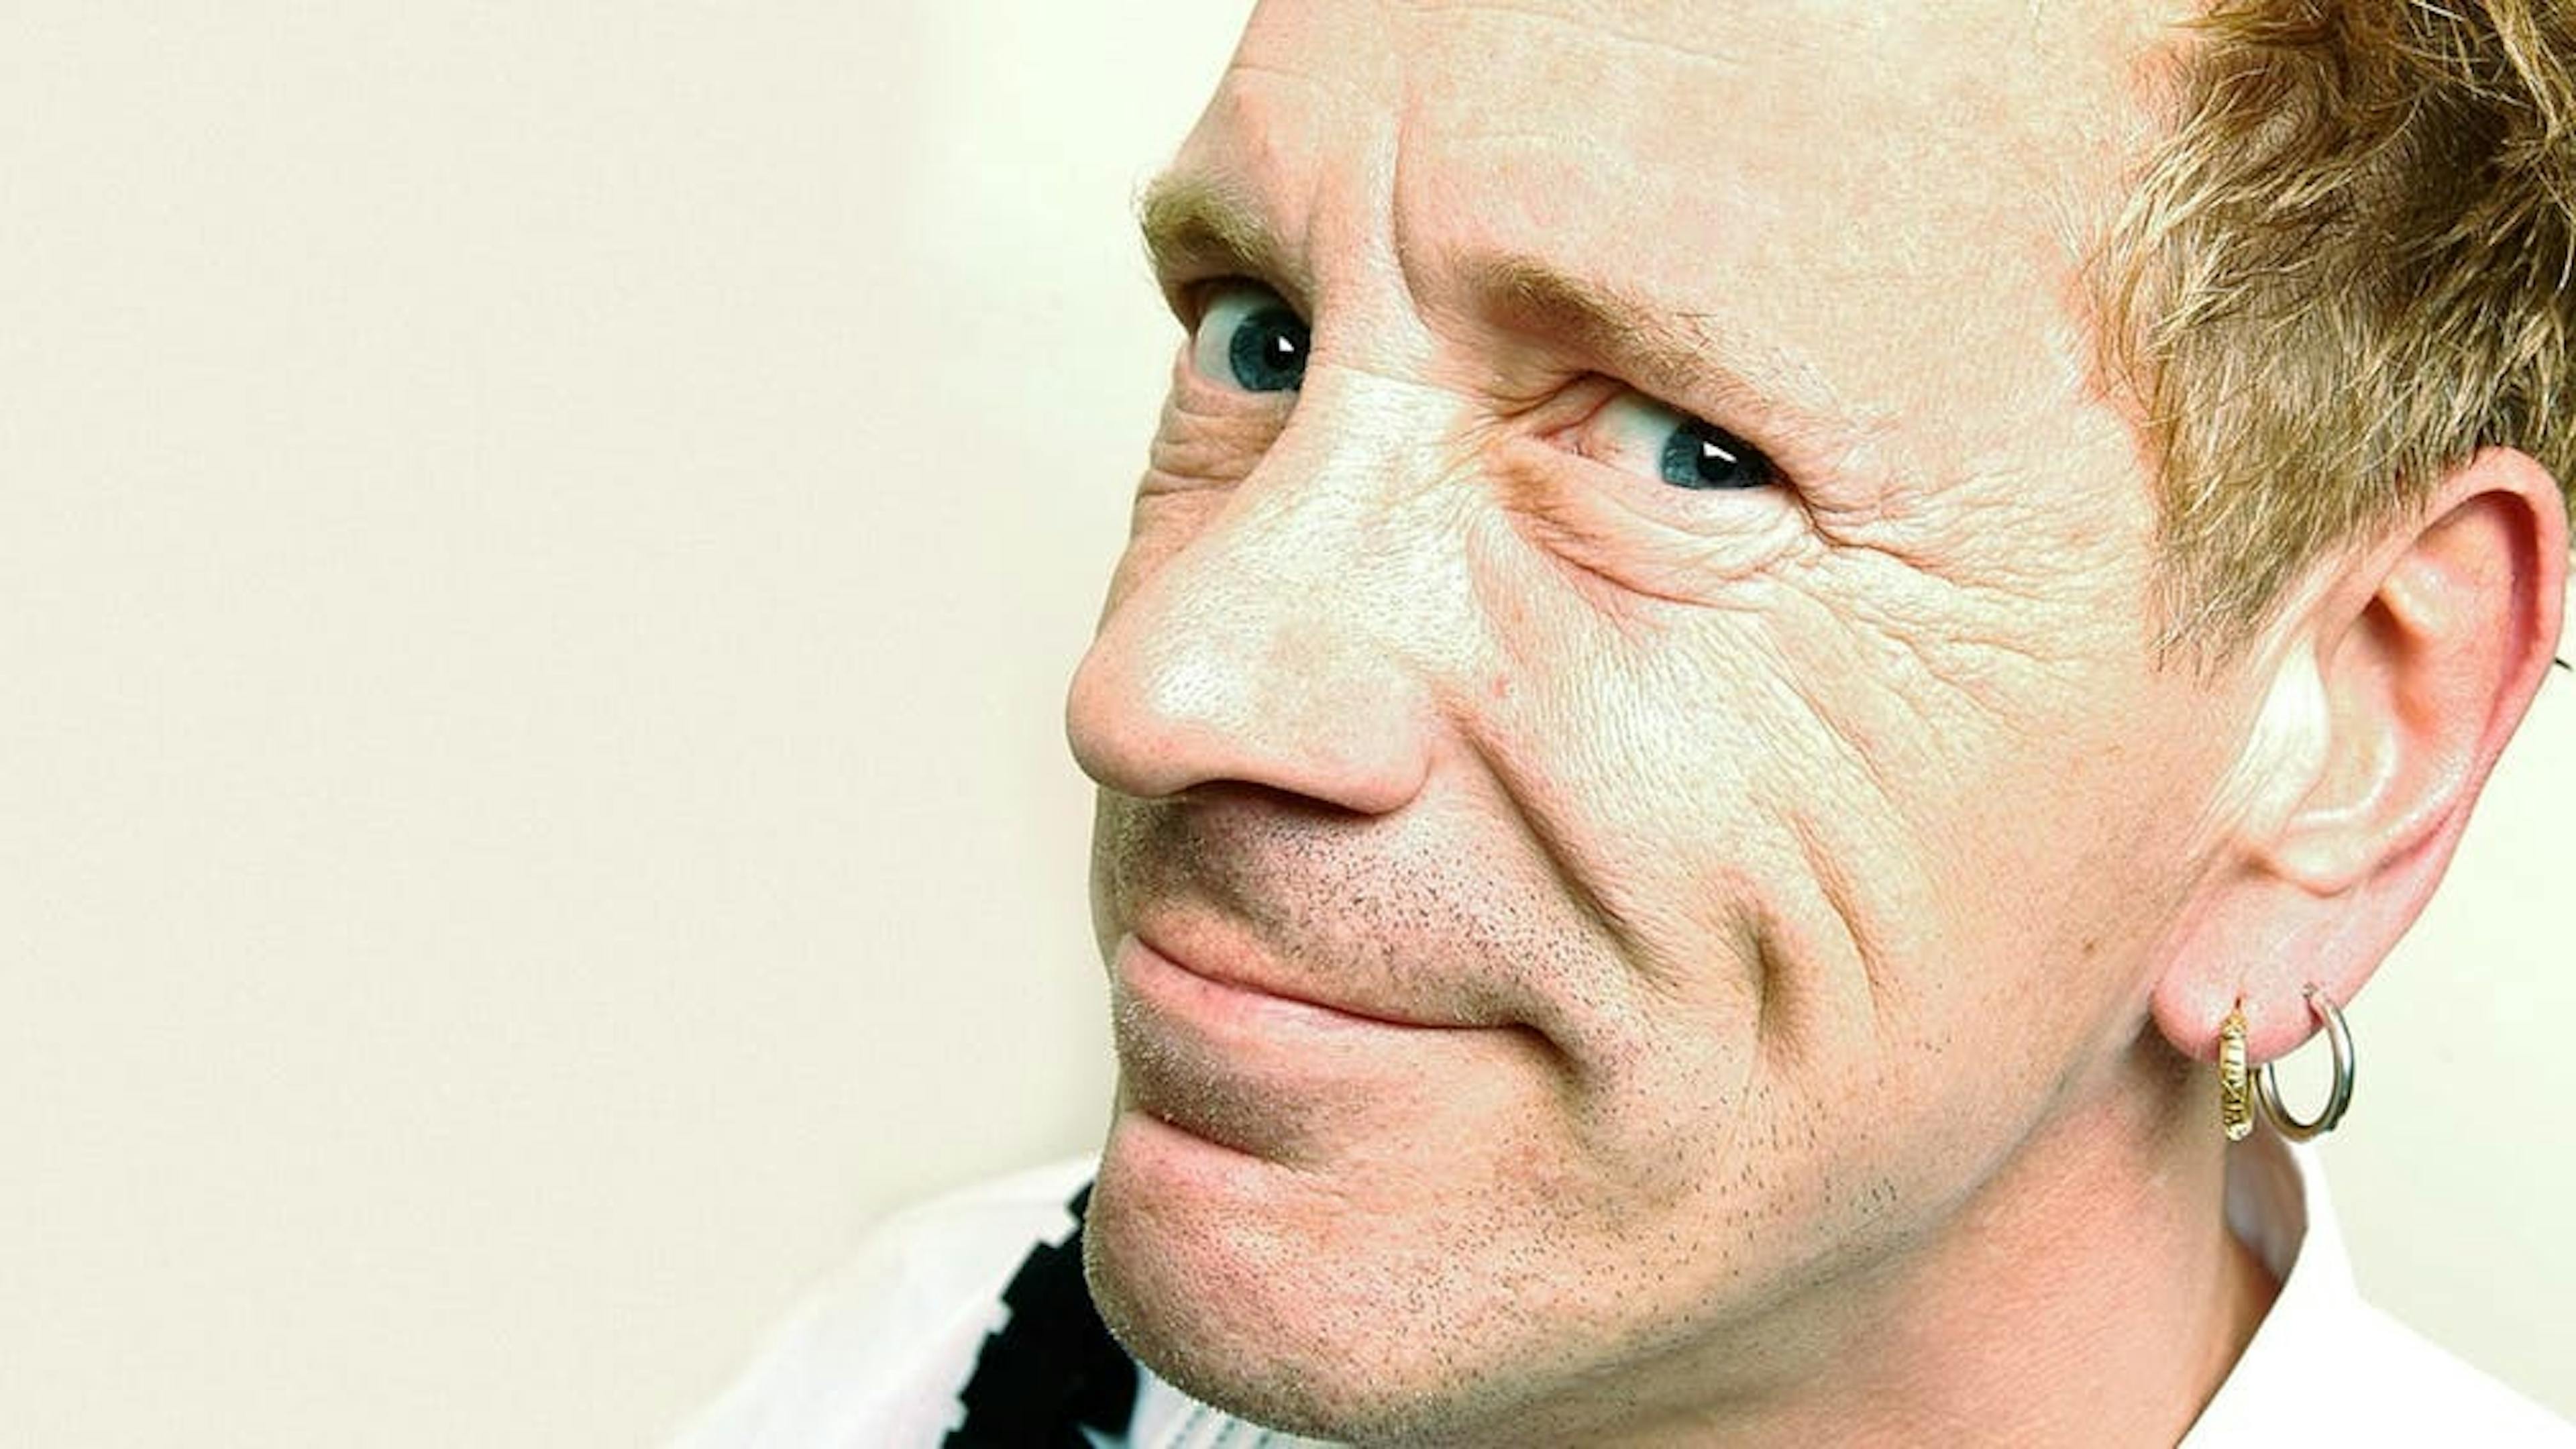 John Lydon: "I love putting myself down as a couch potato who just watches TV, but that’s not the actuality at all"